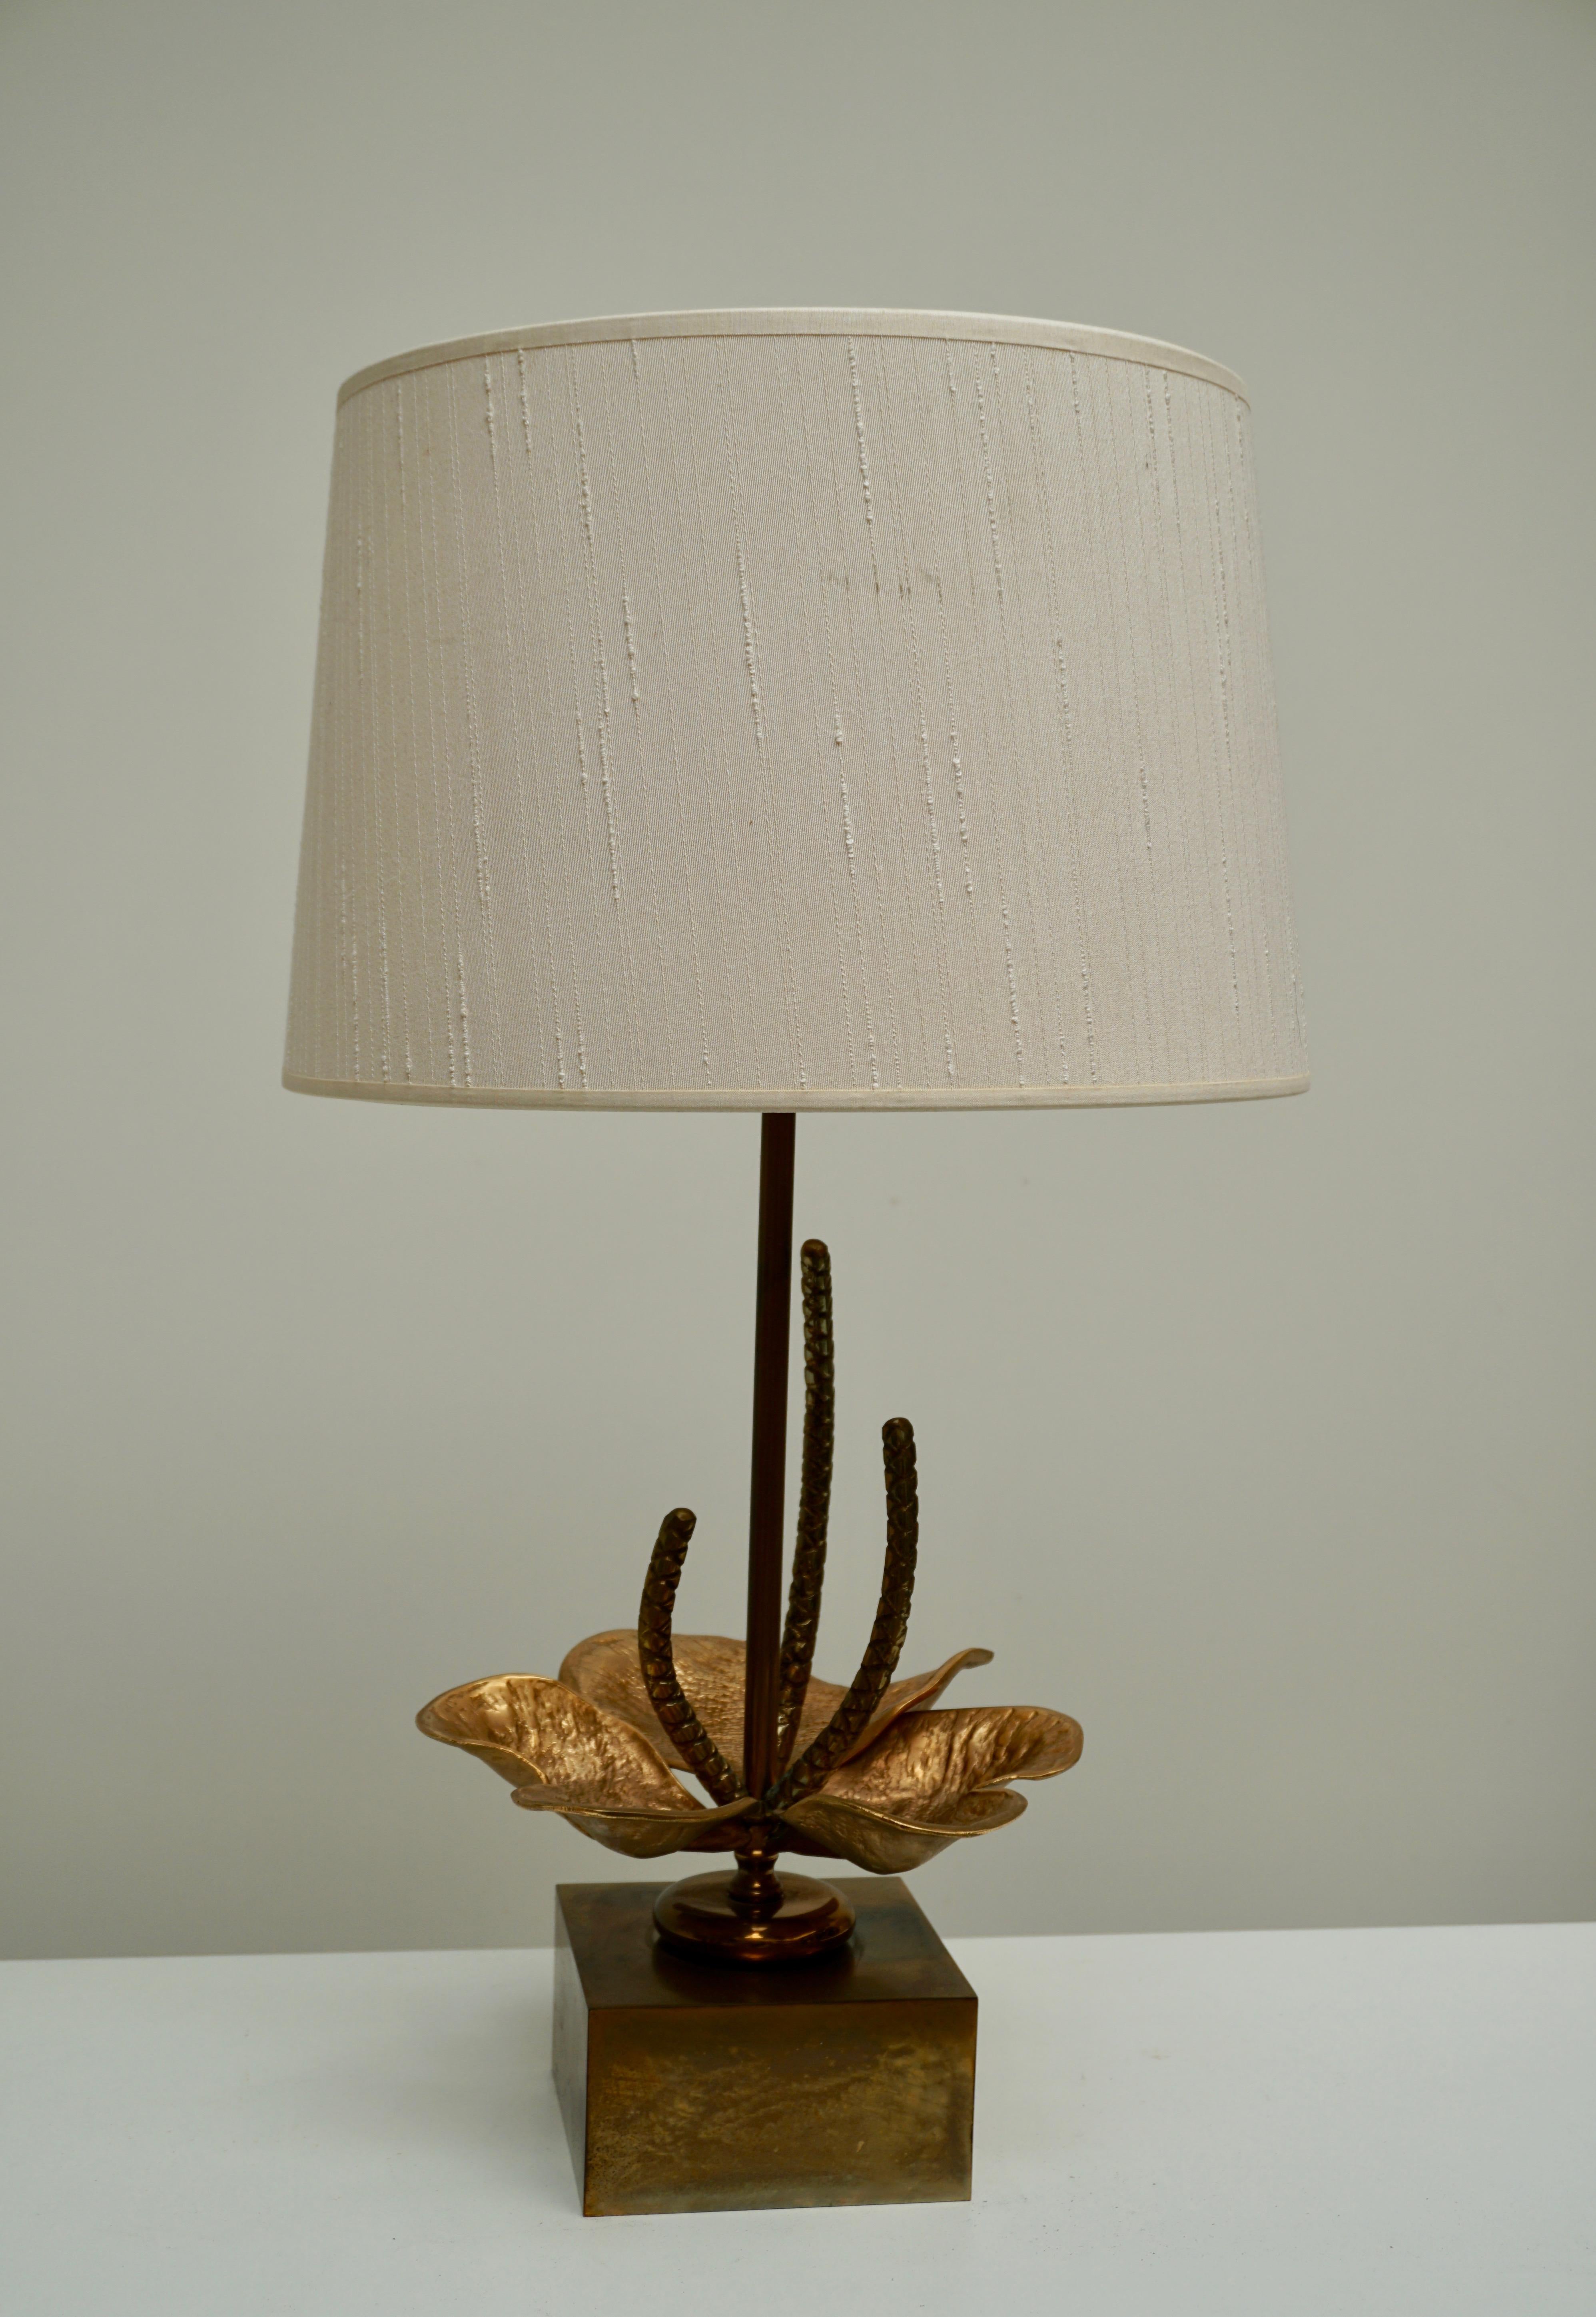 Midcentury brass table lamp with lily flower. France.
Measures: Diameter 35 cm.
Height 60 cm.
Width base 23 cm, depth 26 cm.
Height shade 23 cm.